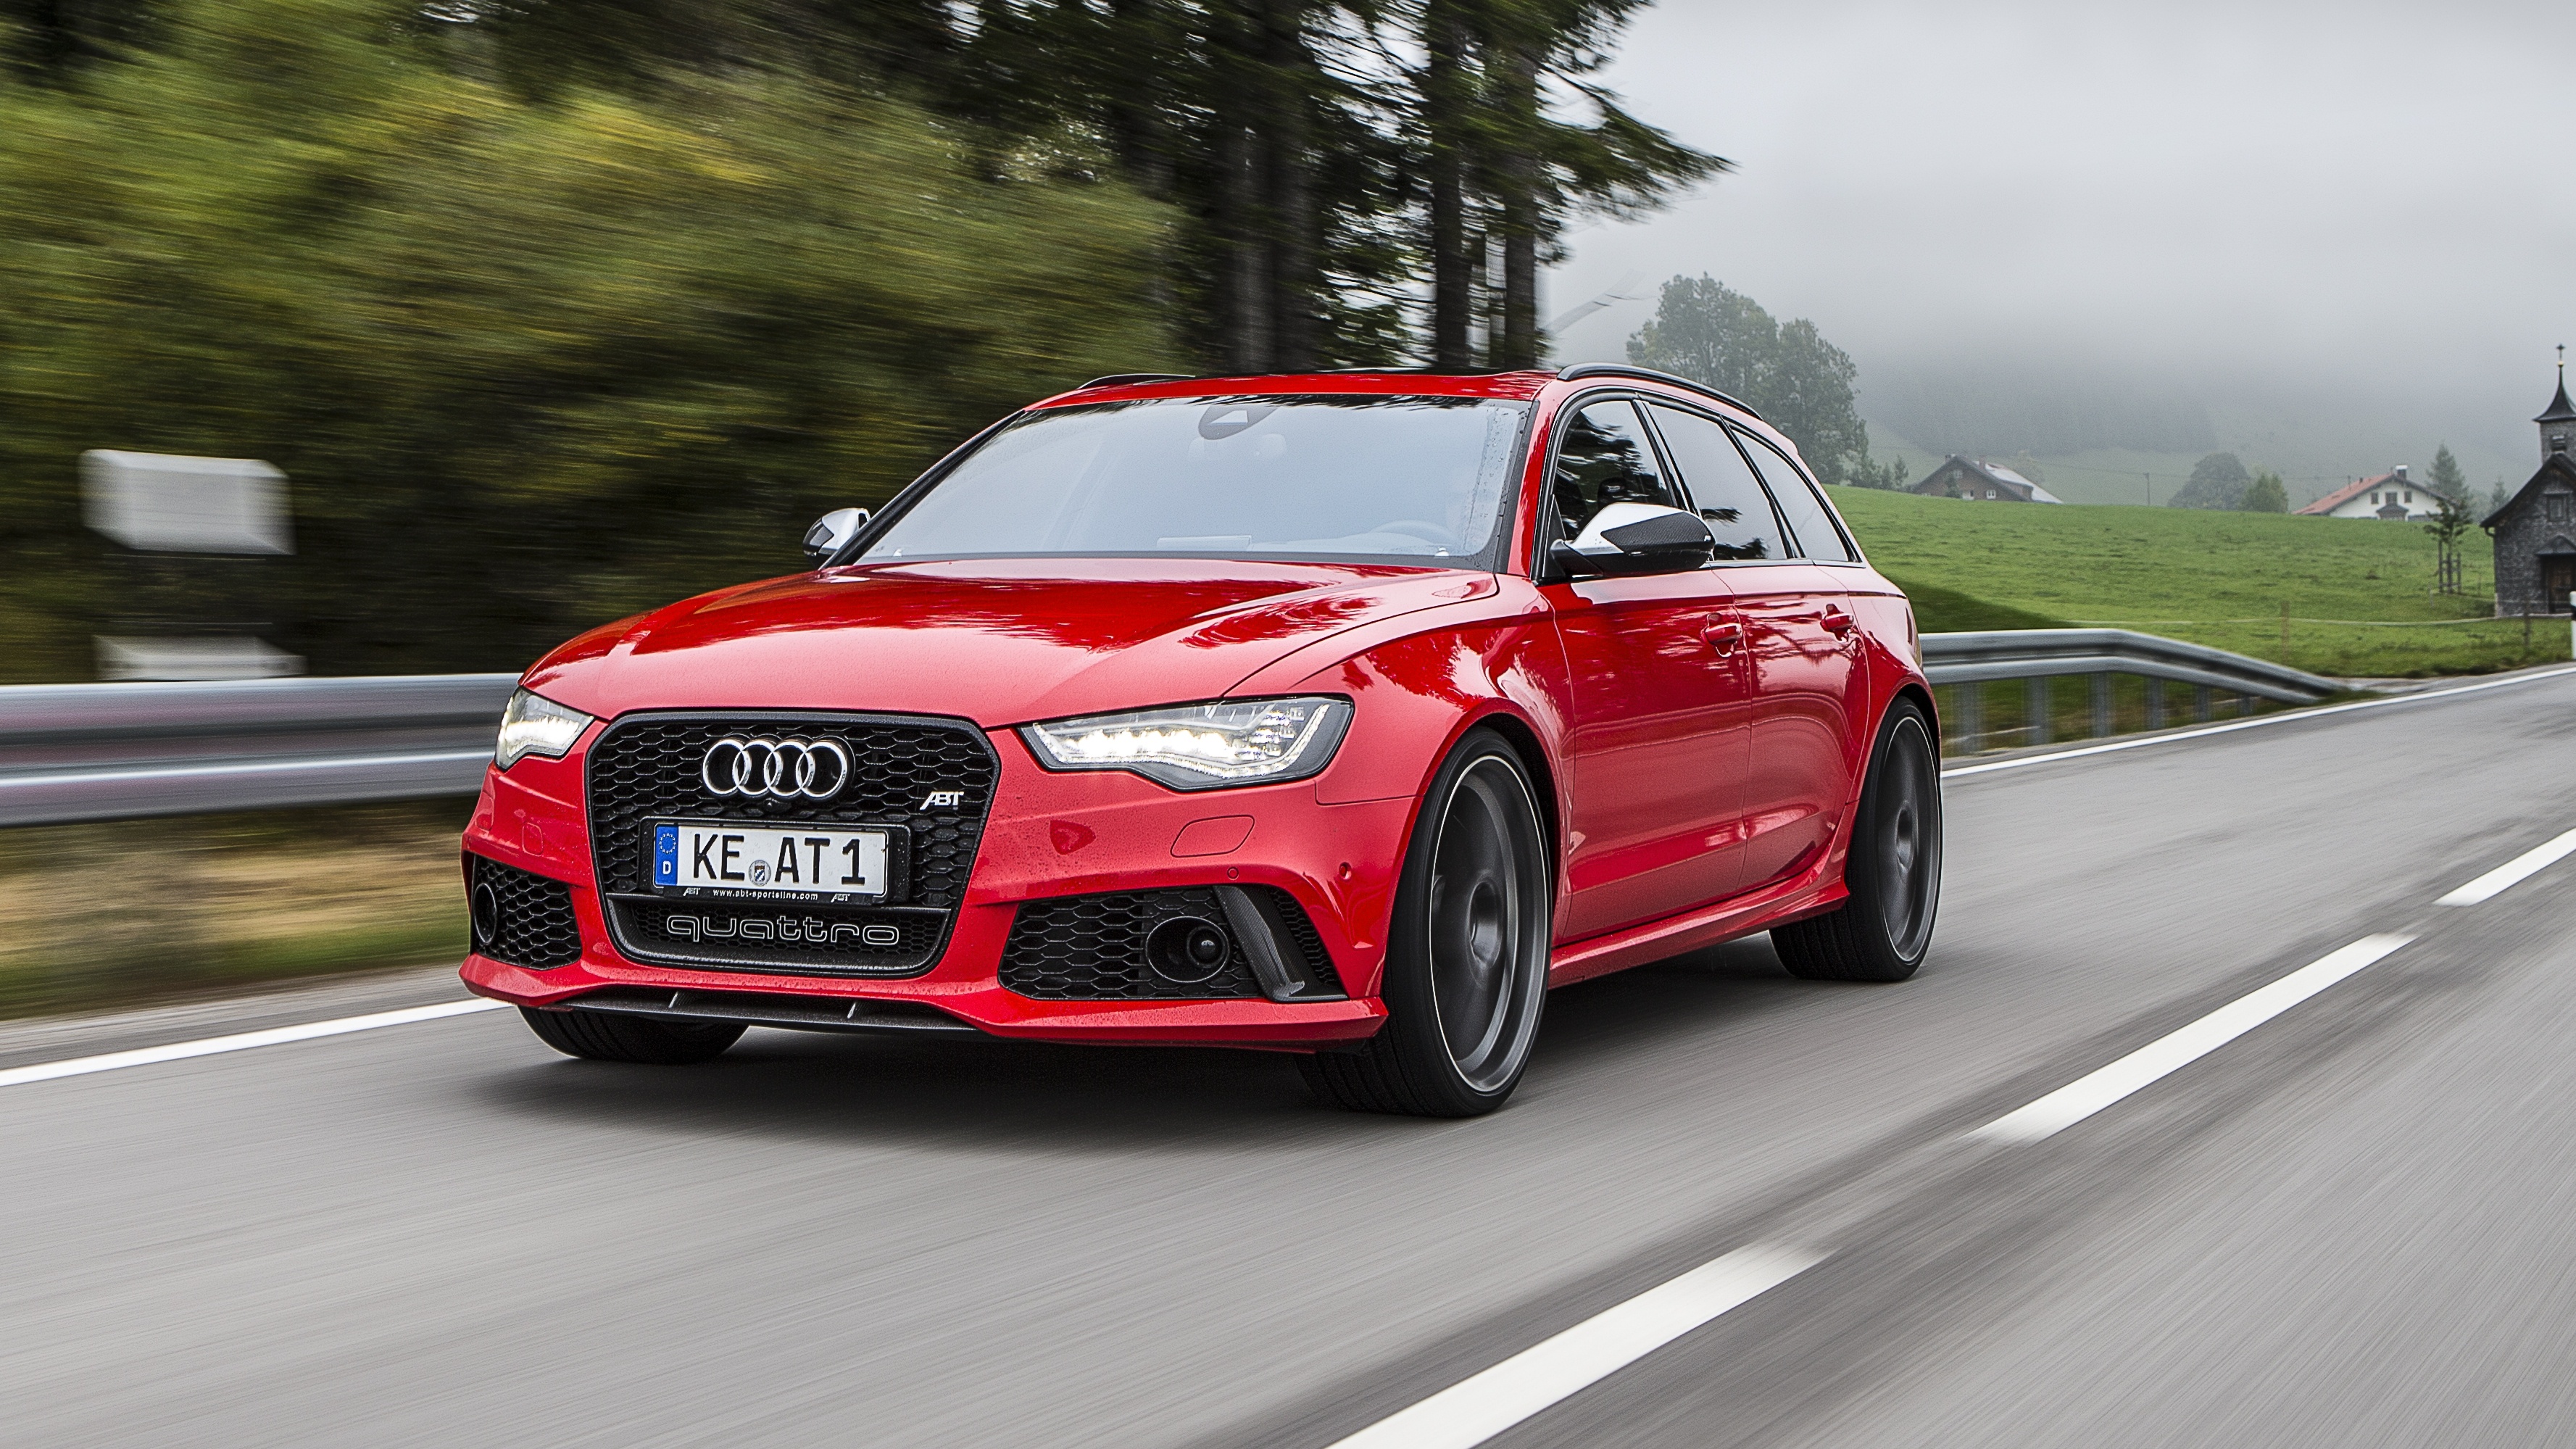 Red Audi Rs6 Avant - Audi Rs6 Abt Red , HD Wallpaper & Backgrounds